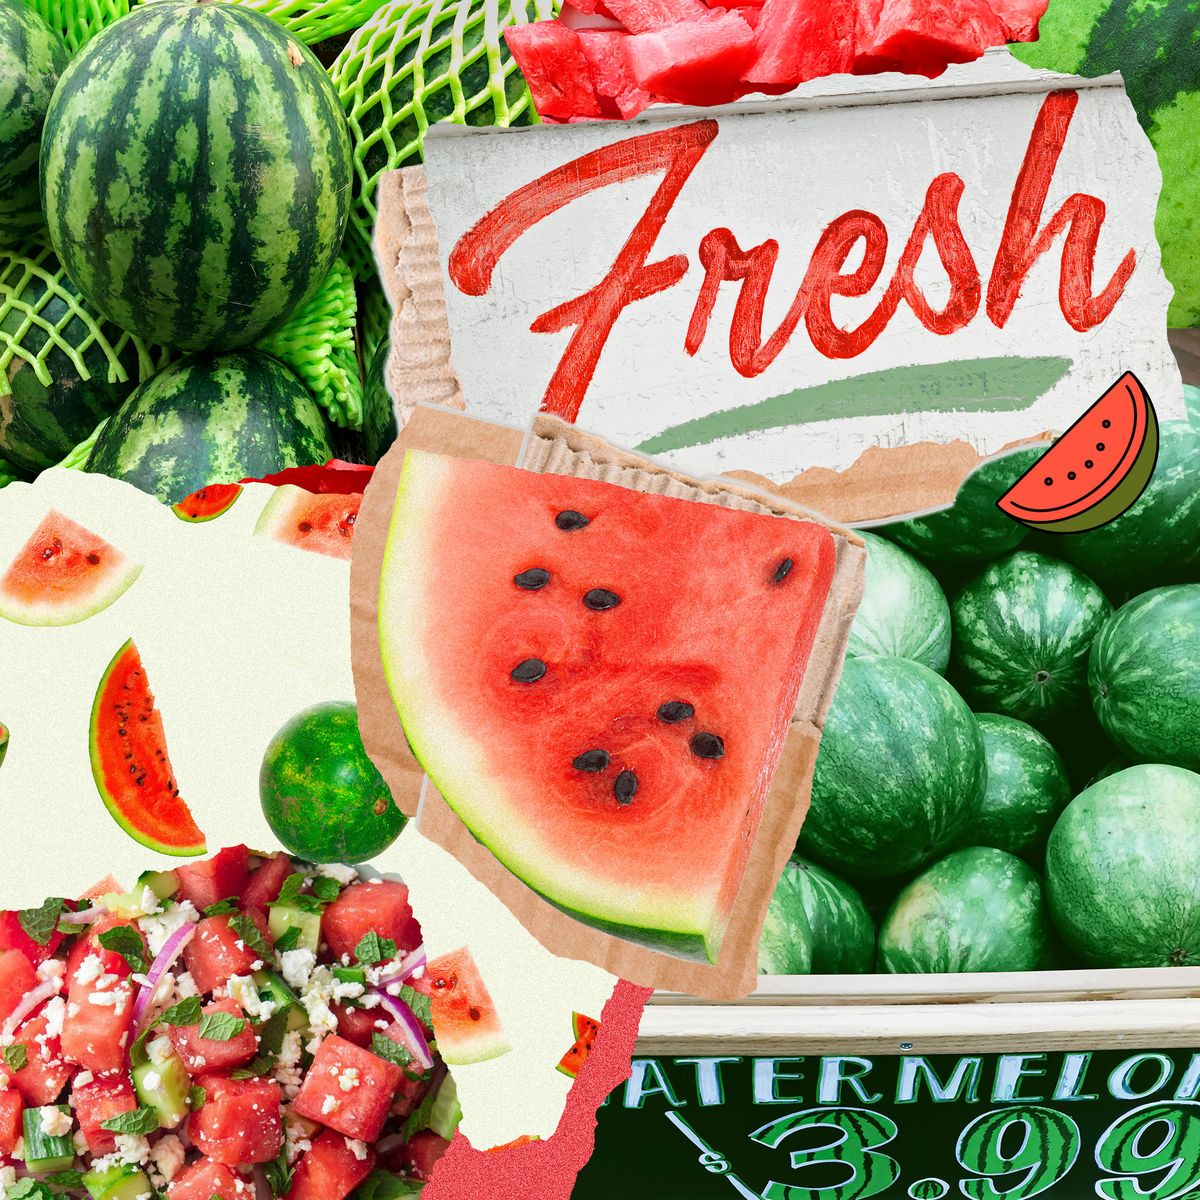 what is watermelon good for